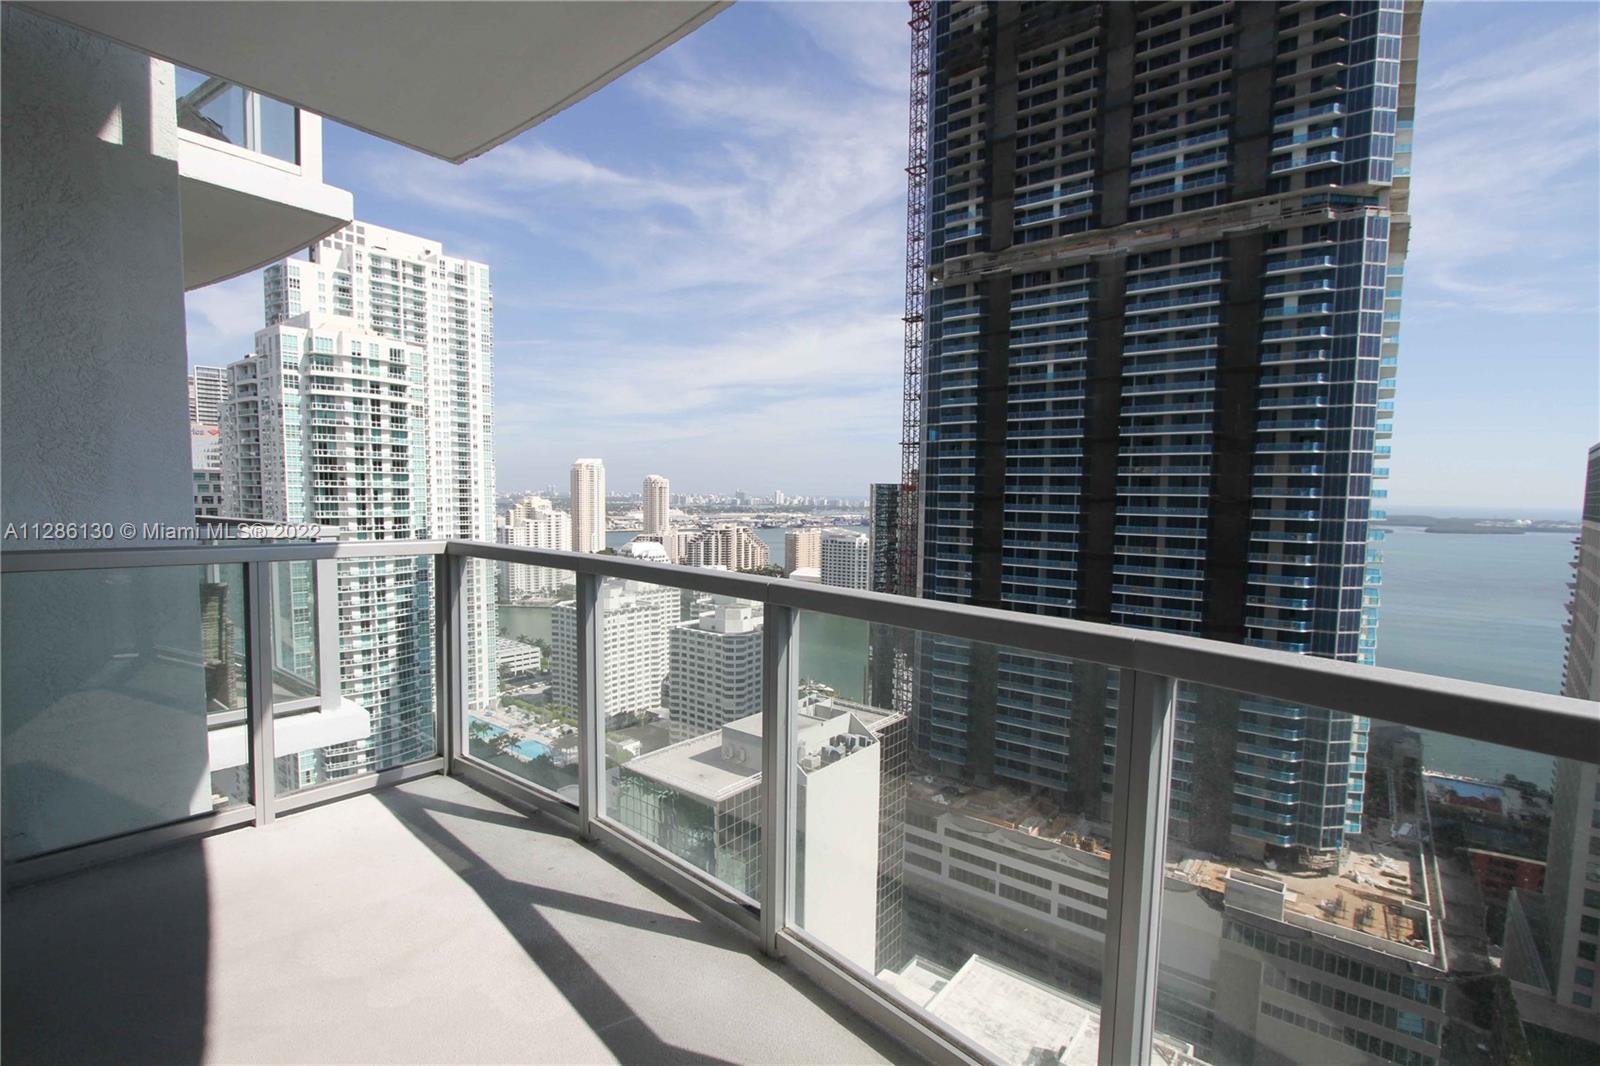 Live in the heart of Miami! If location is what you want, this is your place! Spectacular 963 sq ft space on 34th floor overlooking Brickell Avenue, Biscayne Bay and the Port of Miami. Huge balcony. Washer/dryer in unit. Fantastic pool deck overlooking the city located on the 12 floor. Spa/sauna/showers; billiard, cigar, wine, virtual golf rooms. Yoga, cardio & weight rooms. 1 assigned parking space plus valet. Pet friendly up to 25 lbs for 1 dog, 50 lbs. for 2. VERY WALKABLE NEIGHBORHOOD, WalkScore is 99. Transit Score is 96. Walk to MetroMover (< 1 blk), dining, cafes, bistros and entertainment. Take MetroMover/MetroRail to: University of Miami, Brickell City Center, Hospital District, Arts and Entertainment District, Civic center, Miami International Airport, TriRail Service and more.